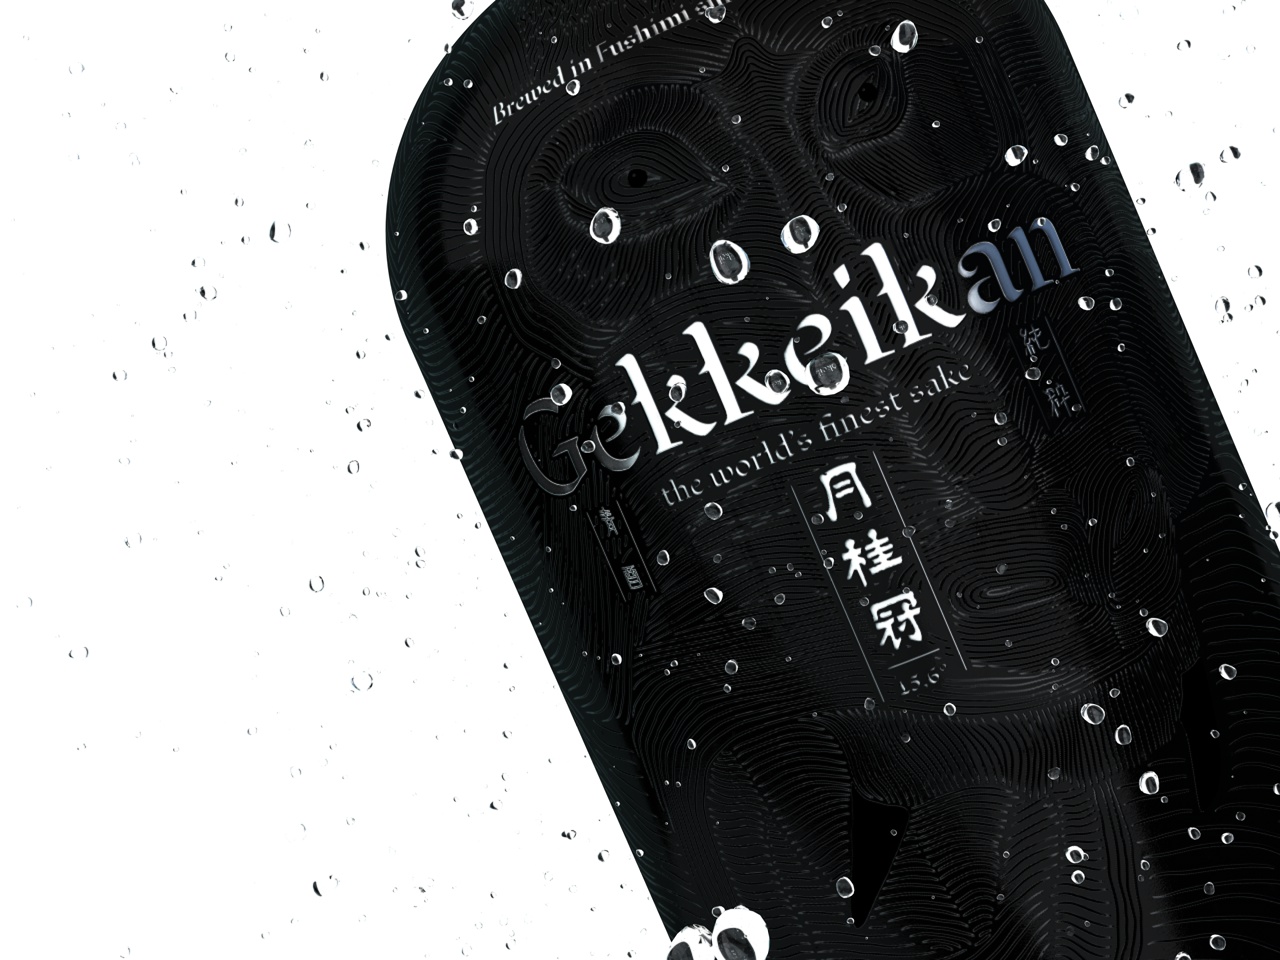 Packaging Design Bottle Collection for the World’s Finest Sake that Marks 30 Years in the USA Market